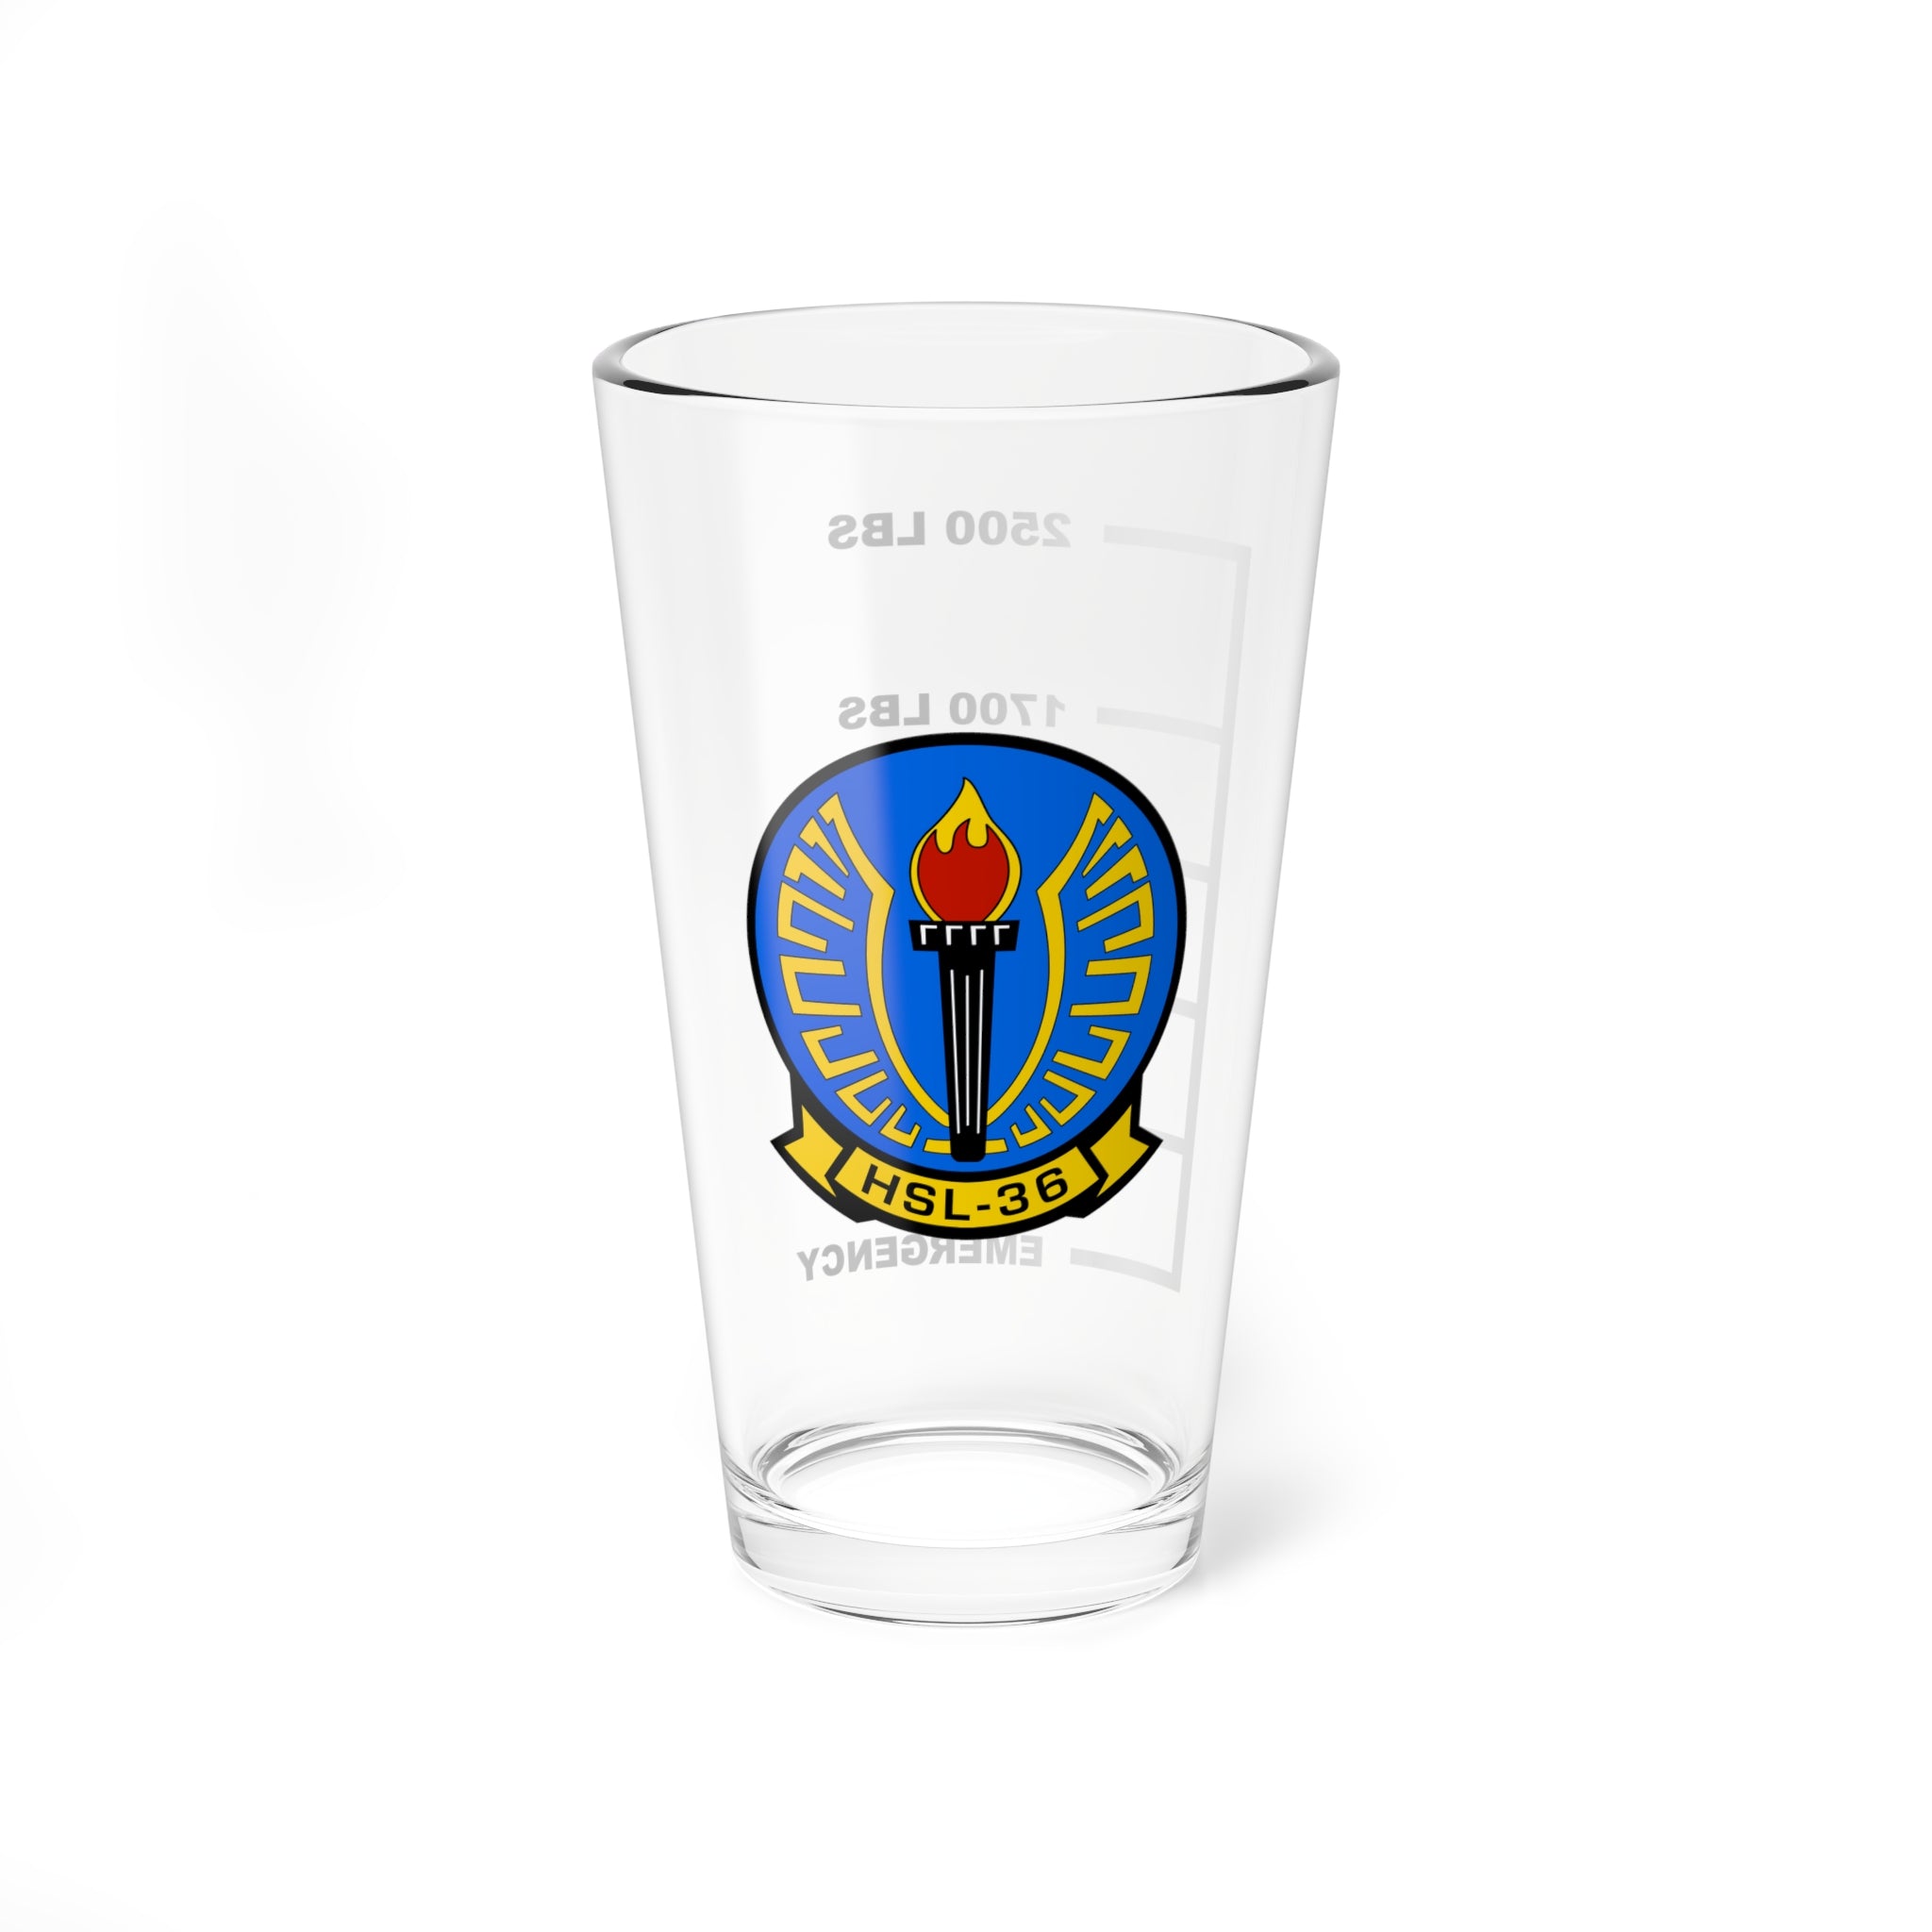 HSL-36 "Lamplighters" Fuel Low Pint Glass, Navy Helicopter ASW Squadron flying the SH-2 Seasprite